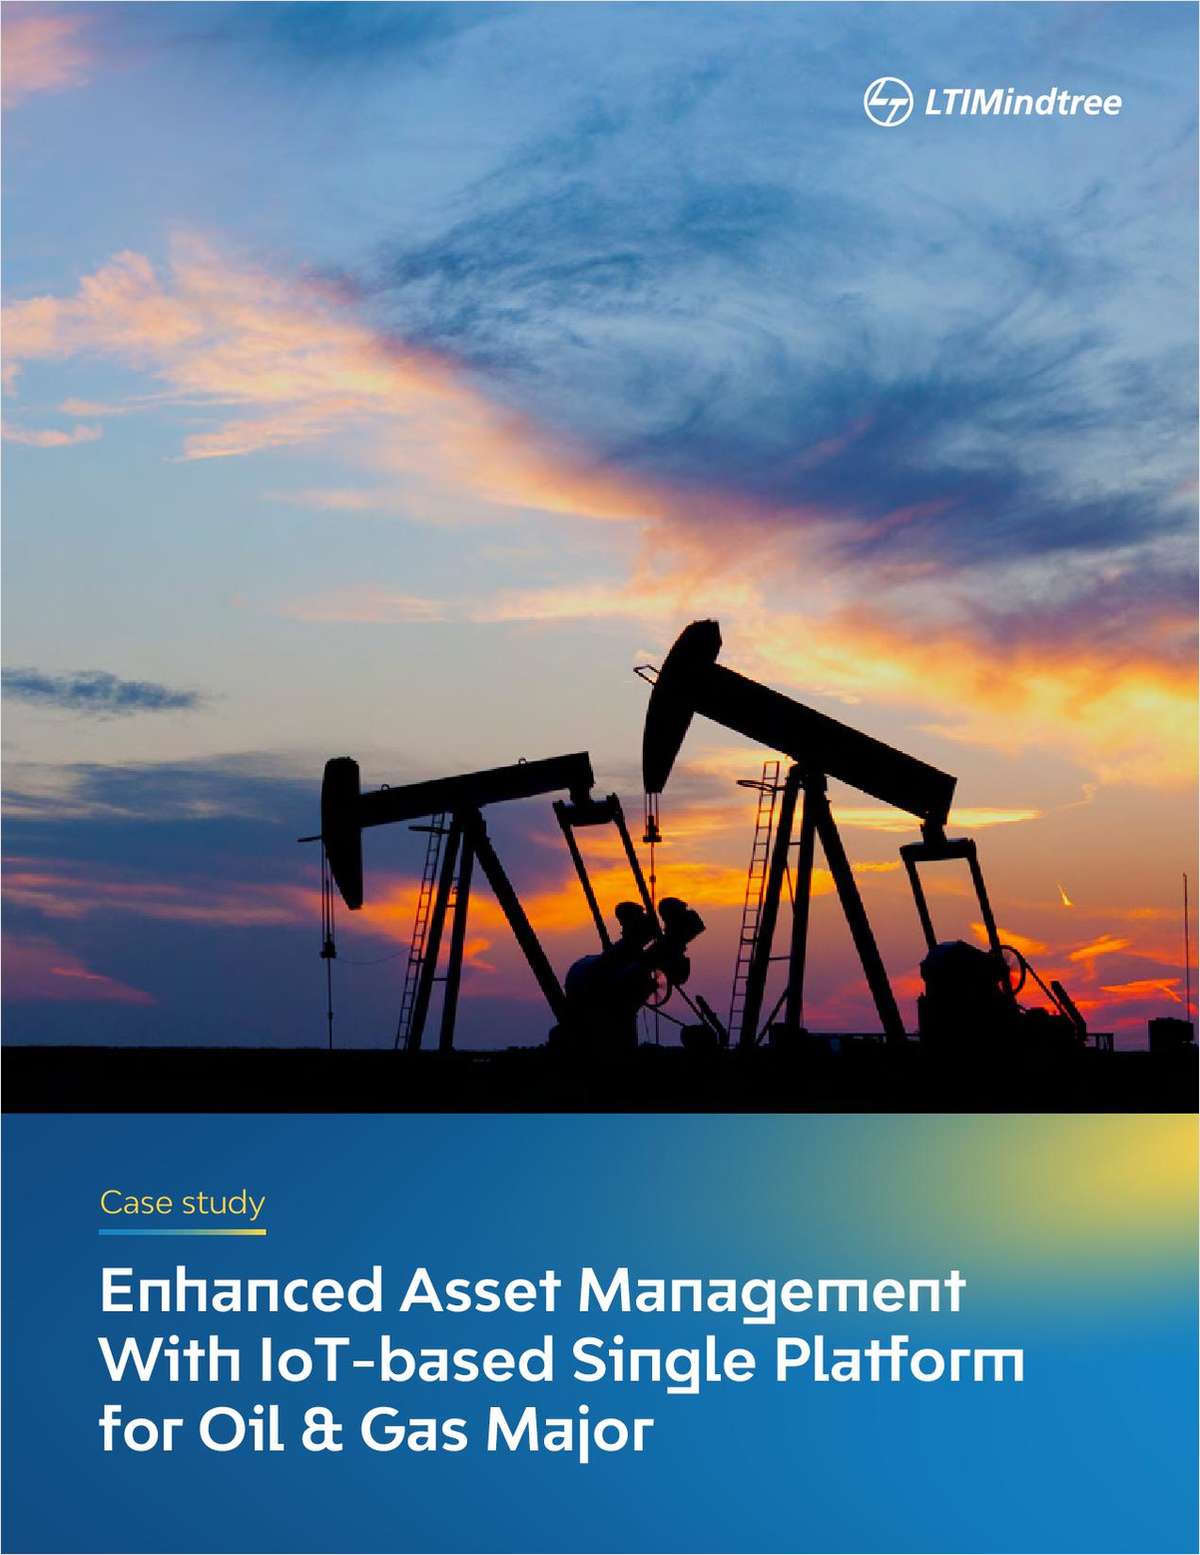 Enhanced Asset Management With IoT-based Single Pla orm for Oil & Gas Major